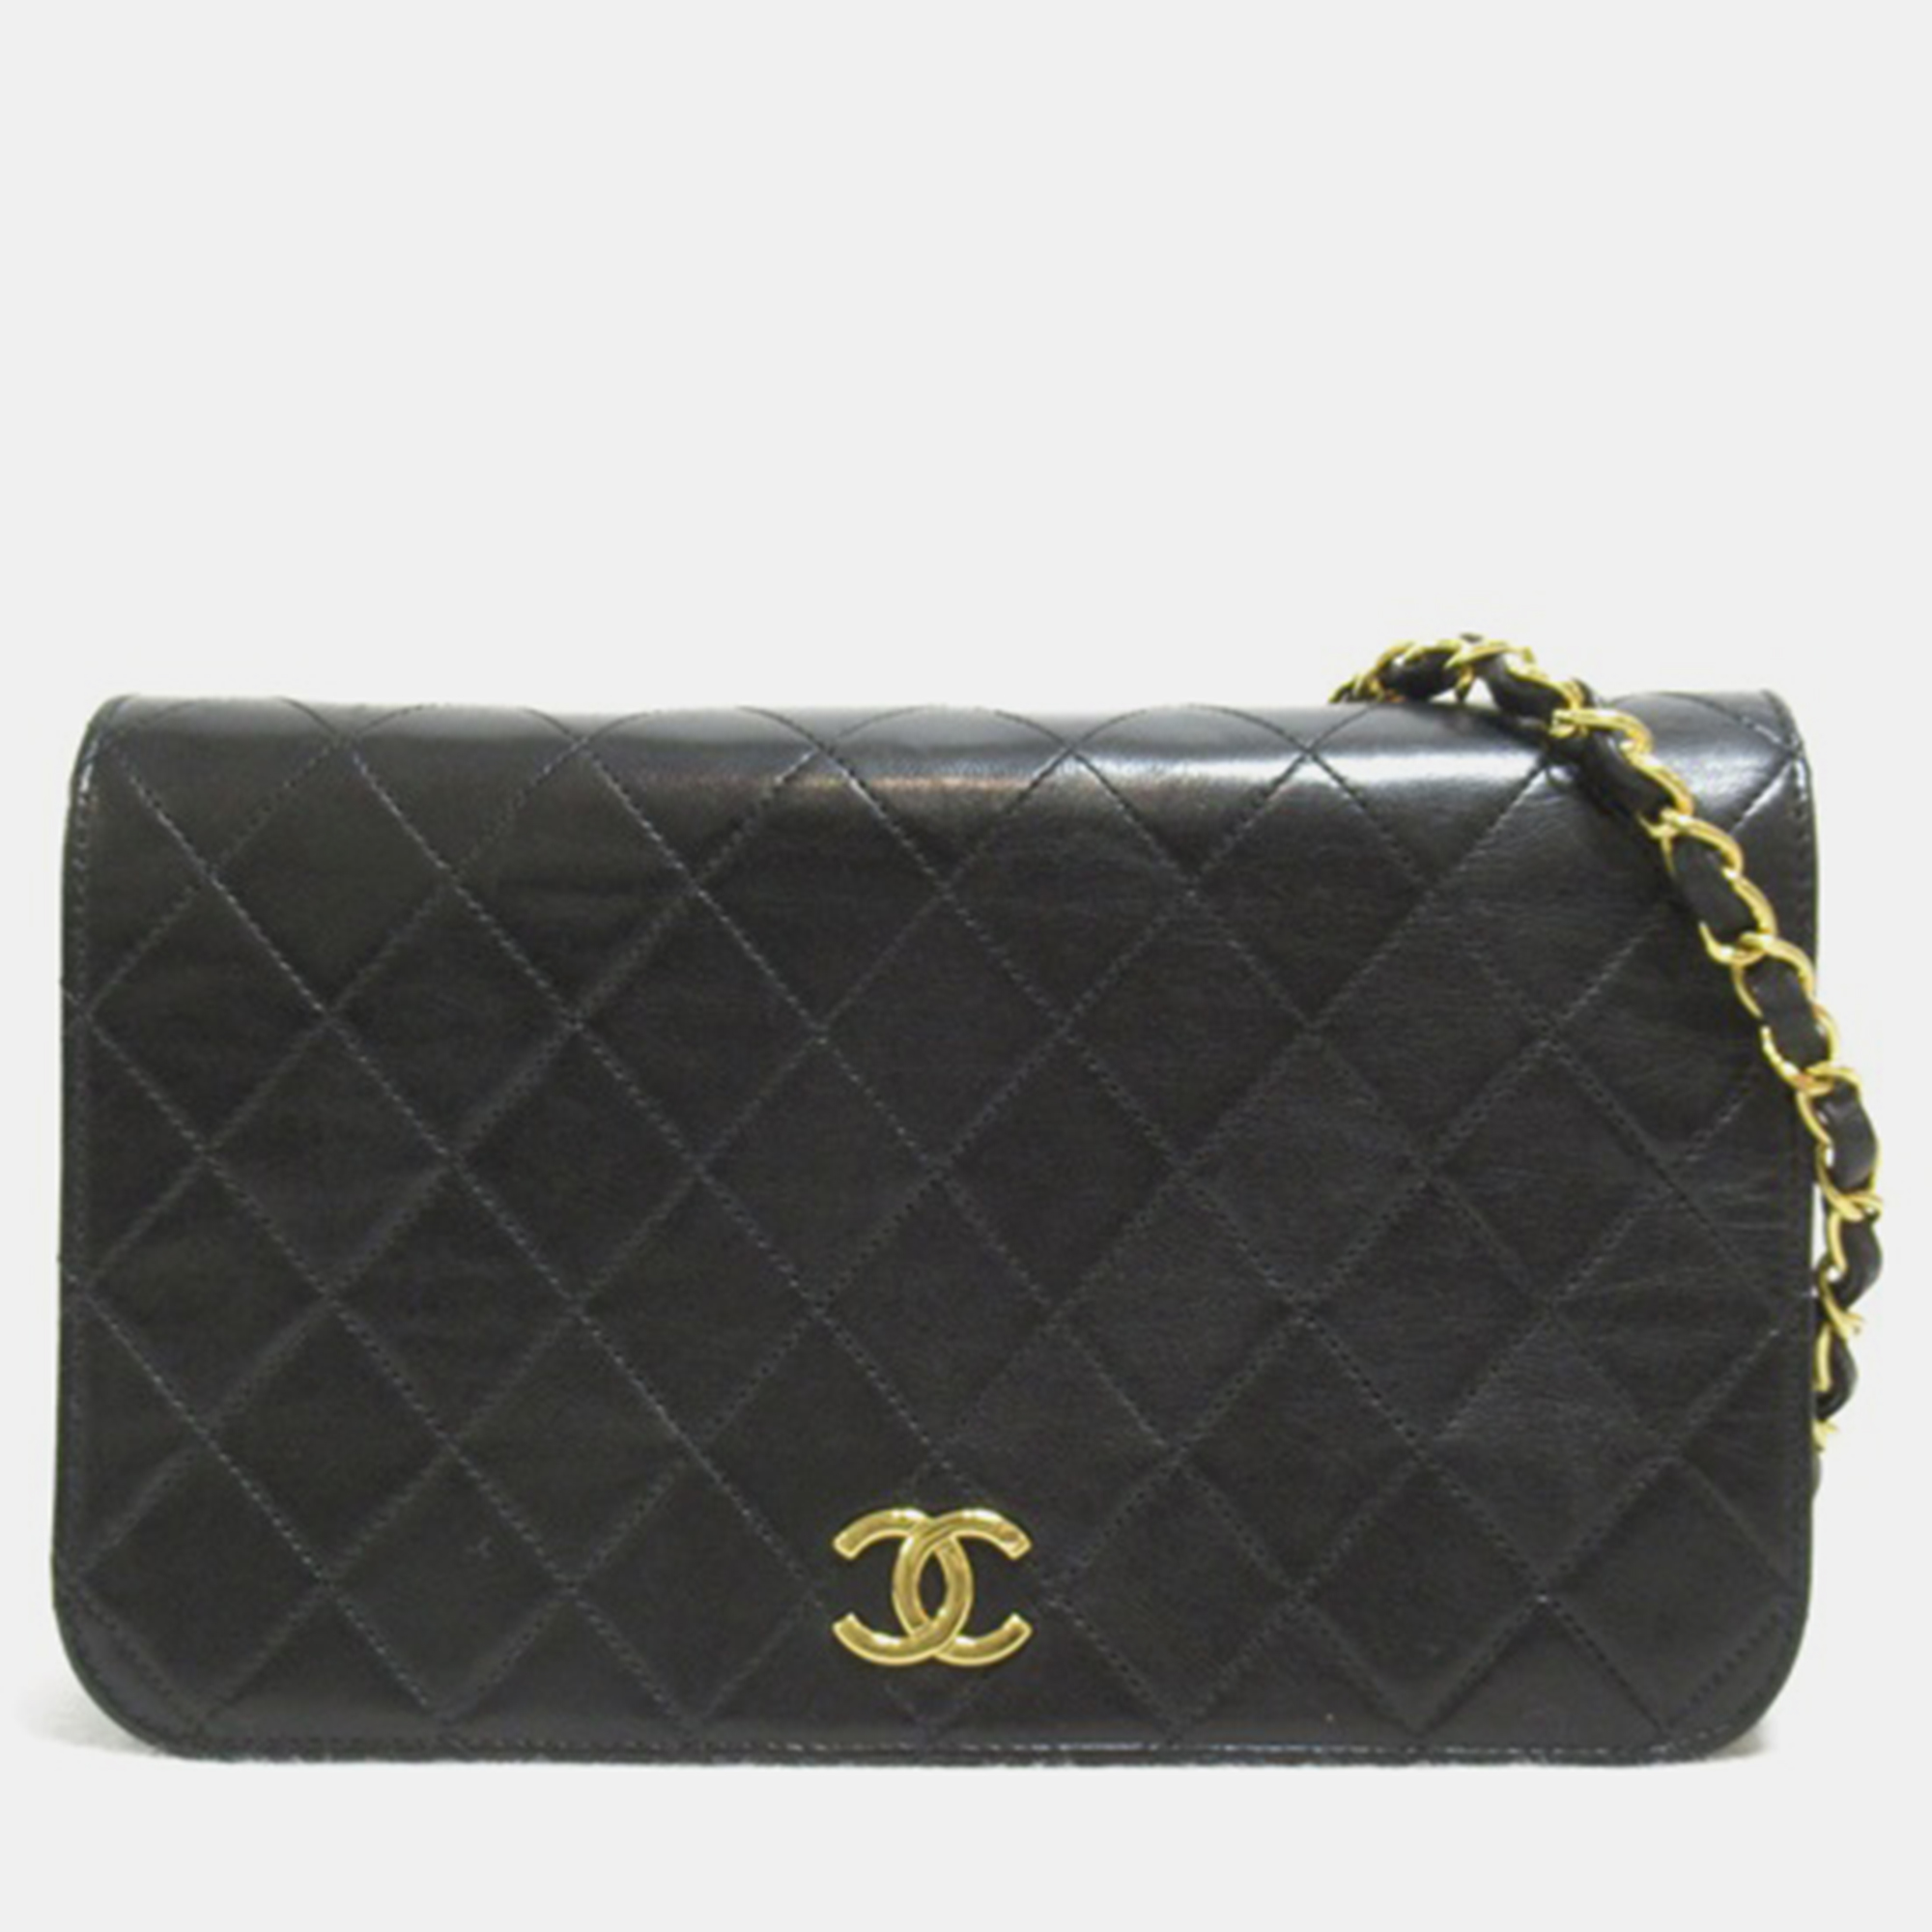 Chanel black leather quilted cc flap bag